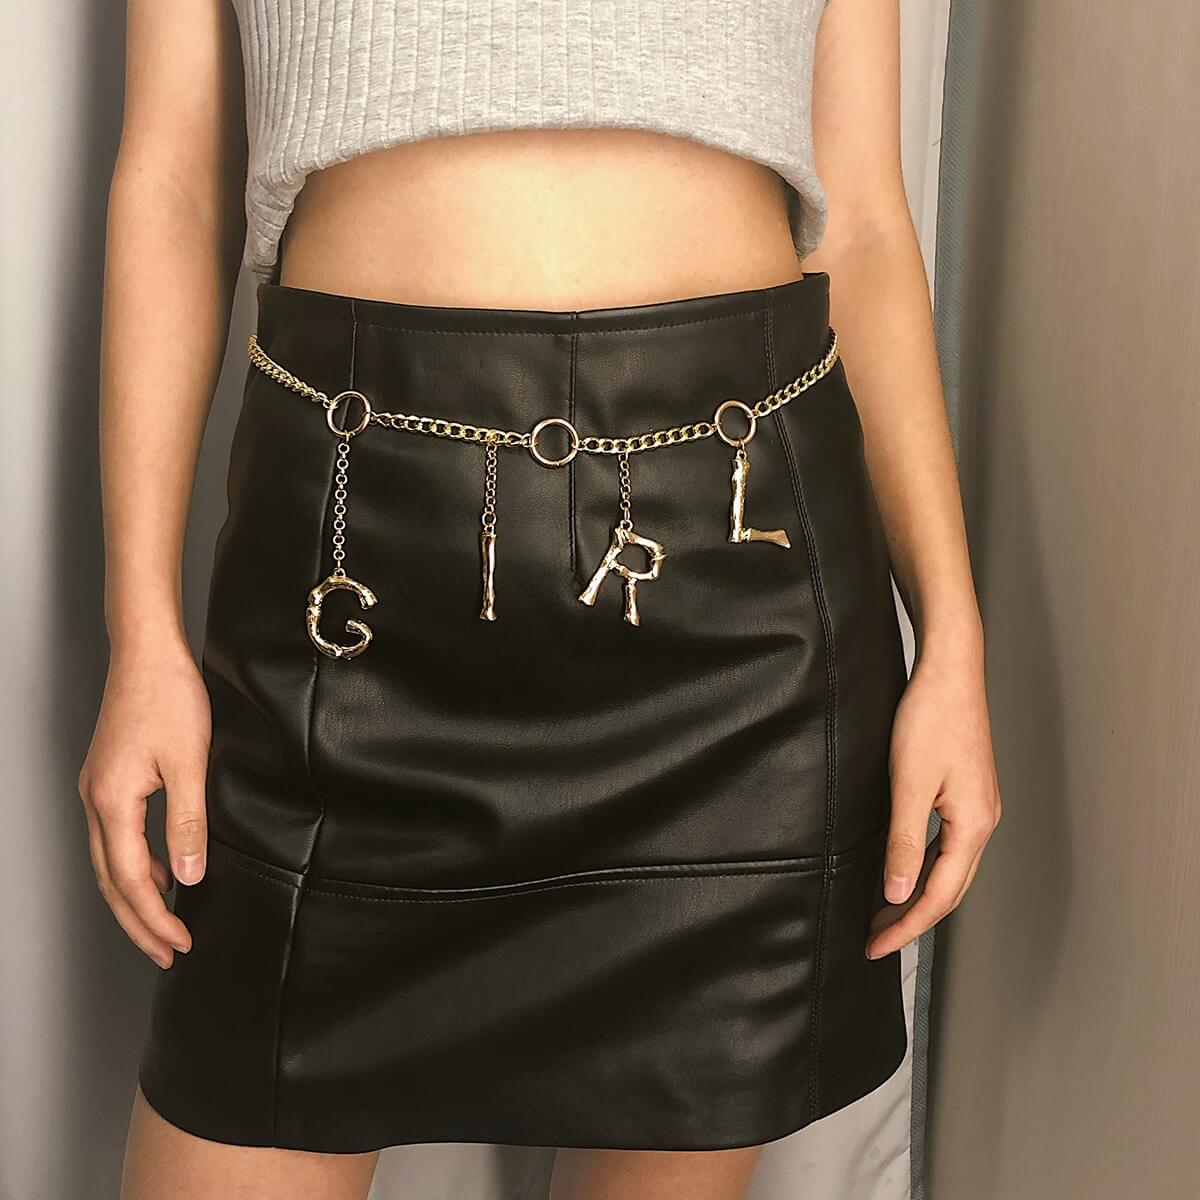 The Ultimate Guide to Selecting and Wearing Waist Chains